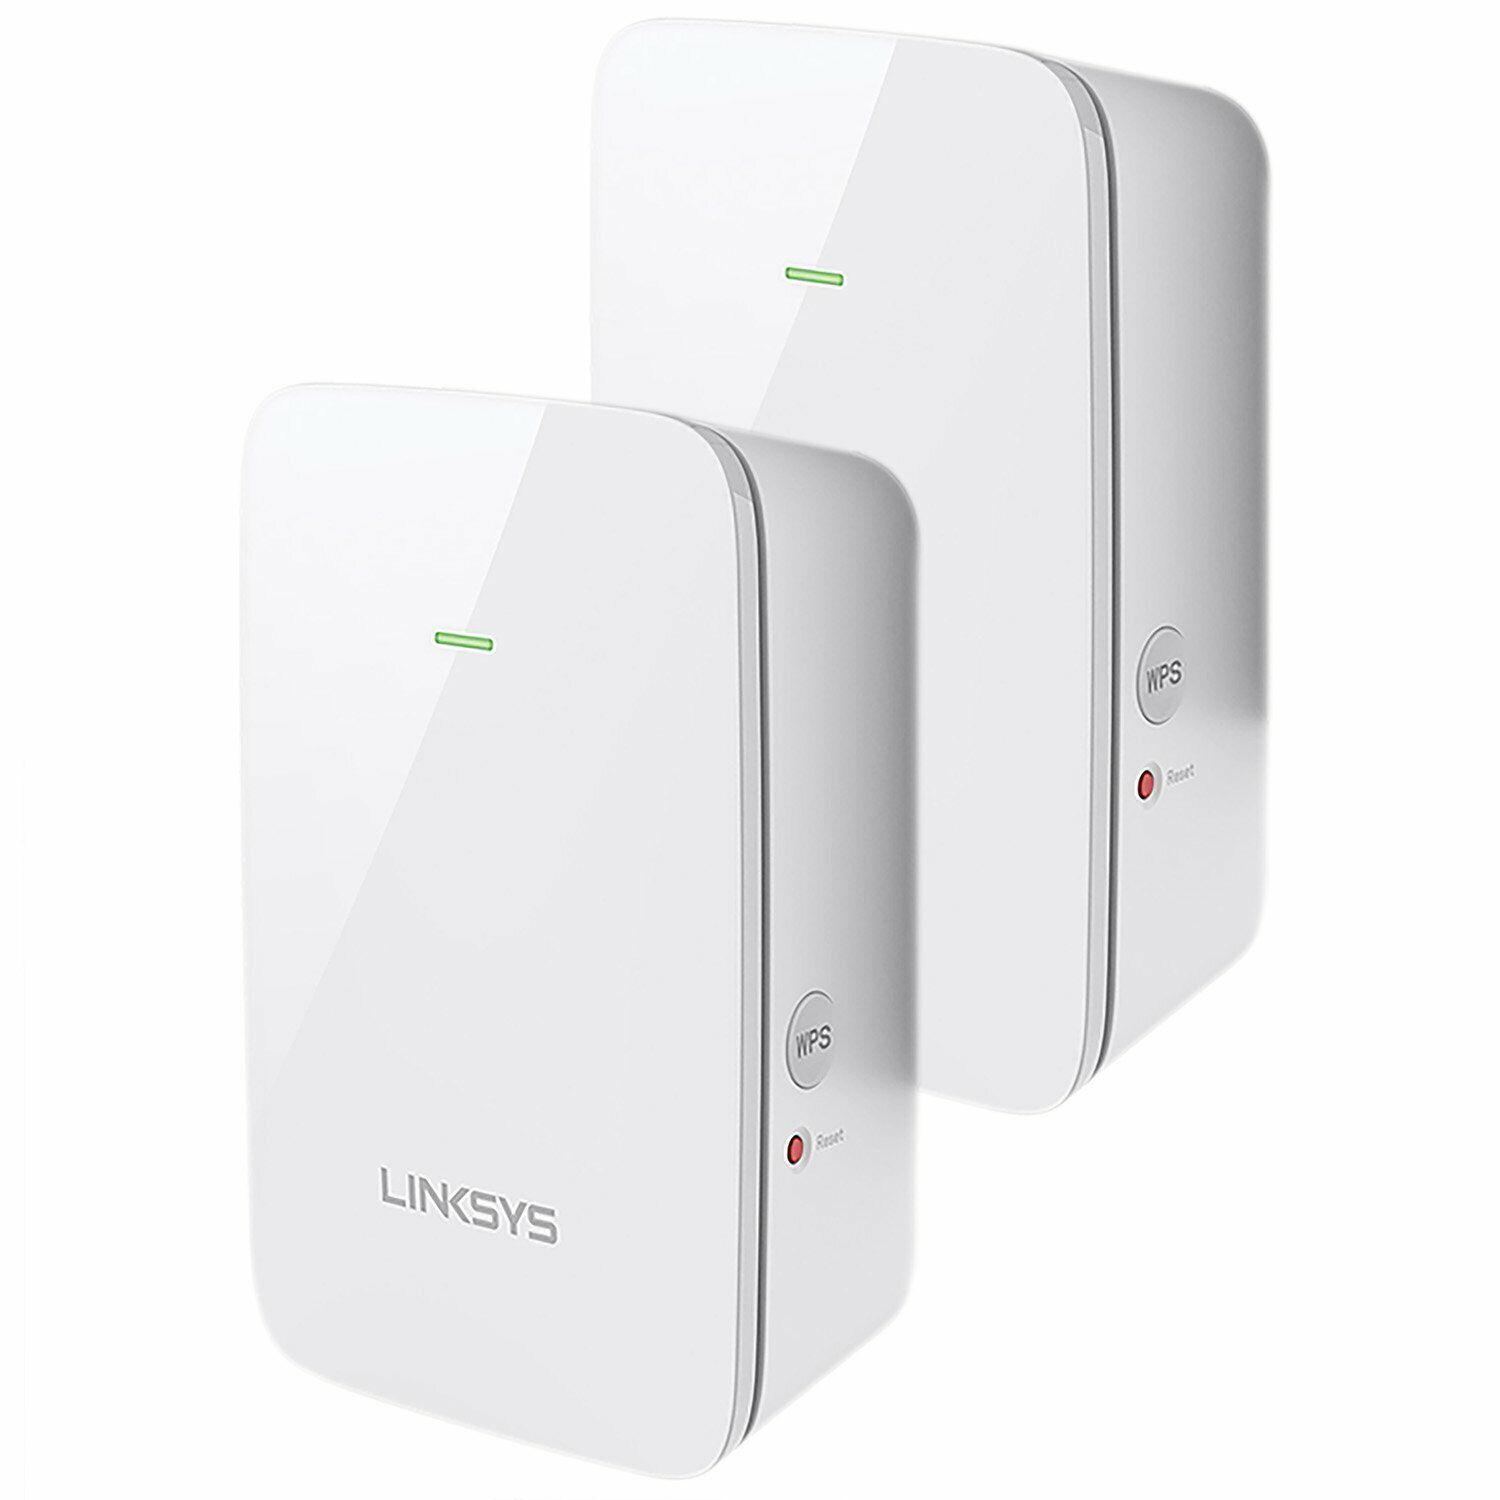 Linksys F5Z0692-2T AC1200 WiFi Dual-Band Range Extender RE6350 (2-PACK), White